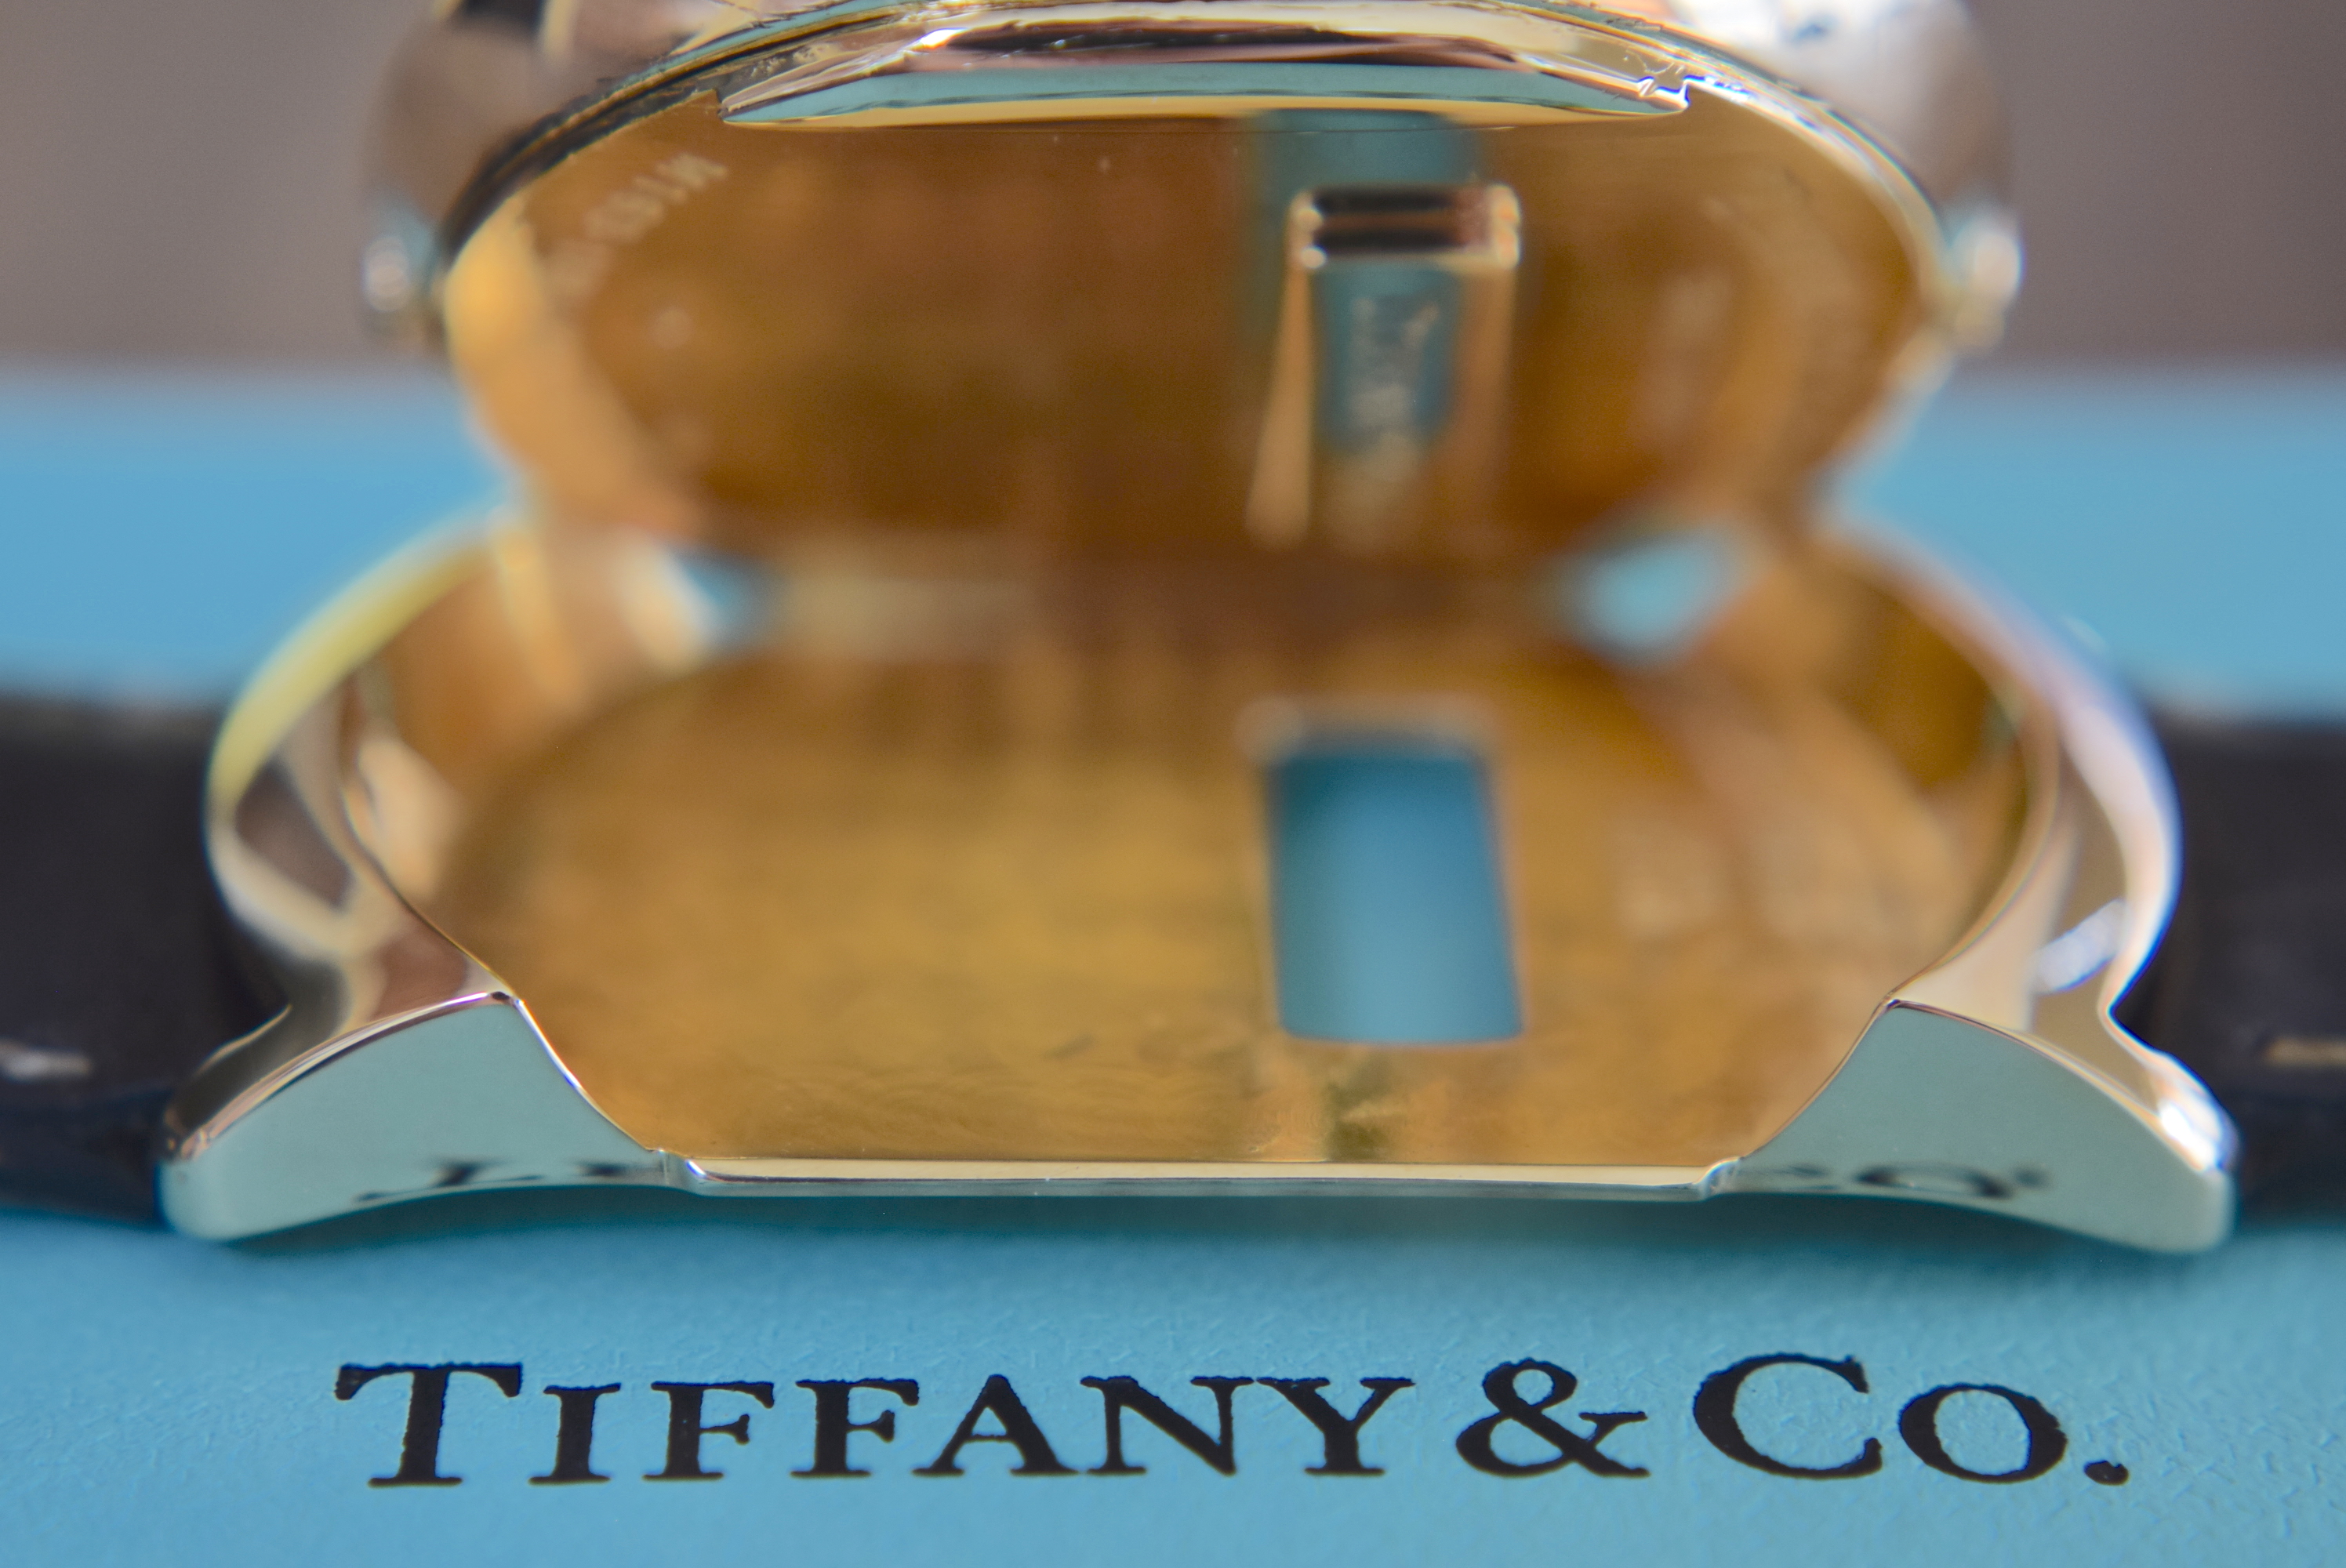 RARE 18K GOLD TIFFANY & CO. "TONNEAU" DUAL-TIME GENTS WRISTWATCH (WITH £9,000 VALUATION) - Image 9 of 10